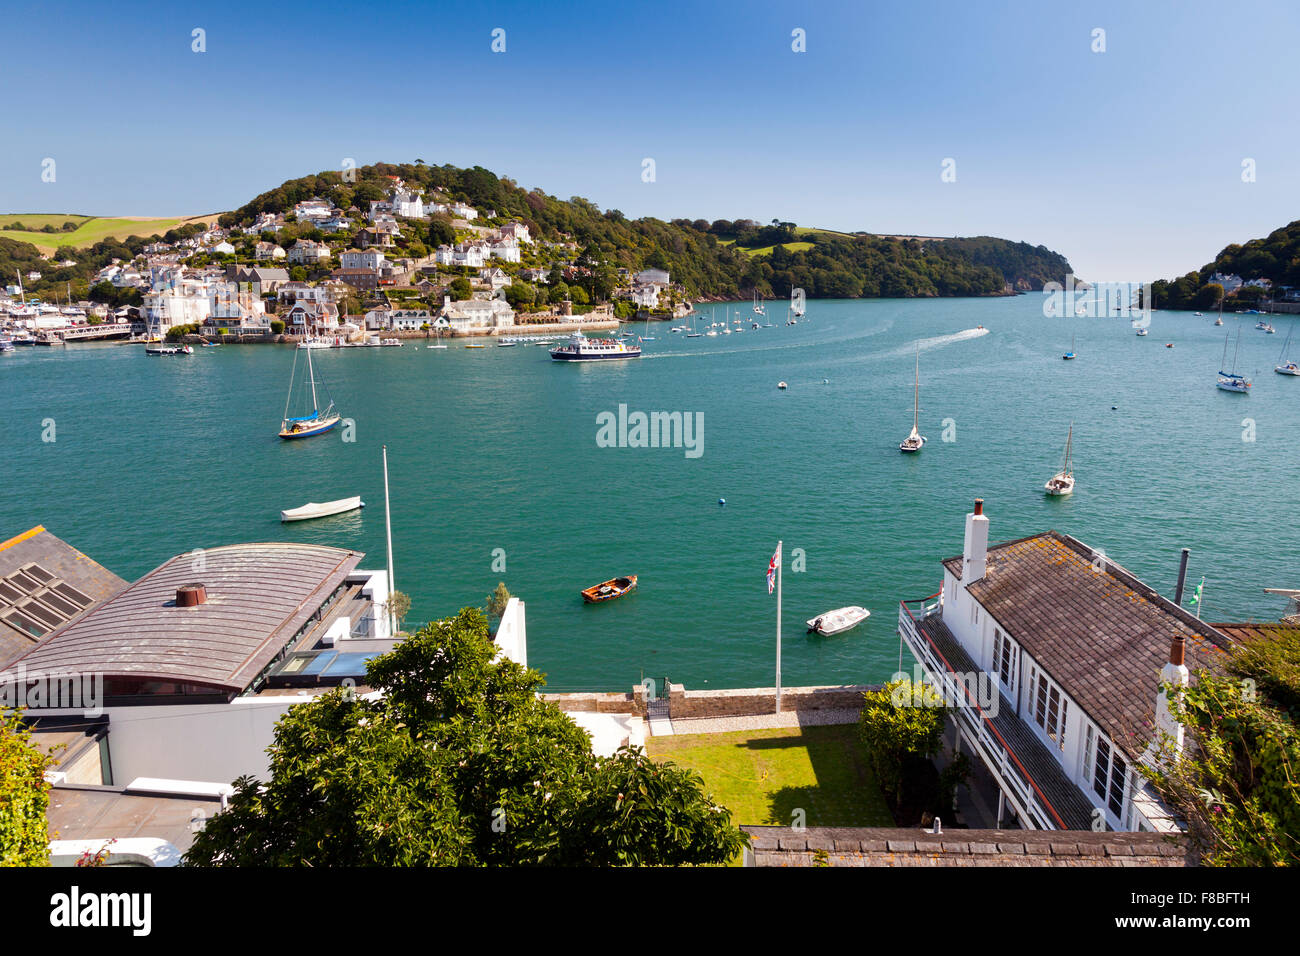 Looking out across the expensive waterfront houses on the River Dart towards Kingswear from Dartmouth, Devon, England, UK Stock Photo